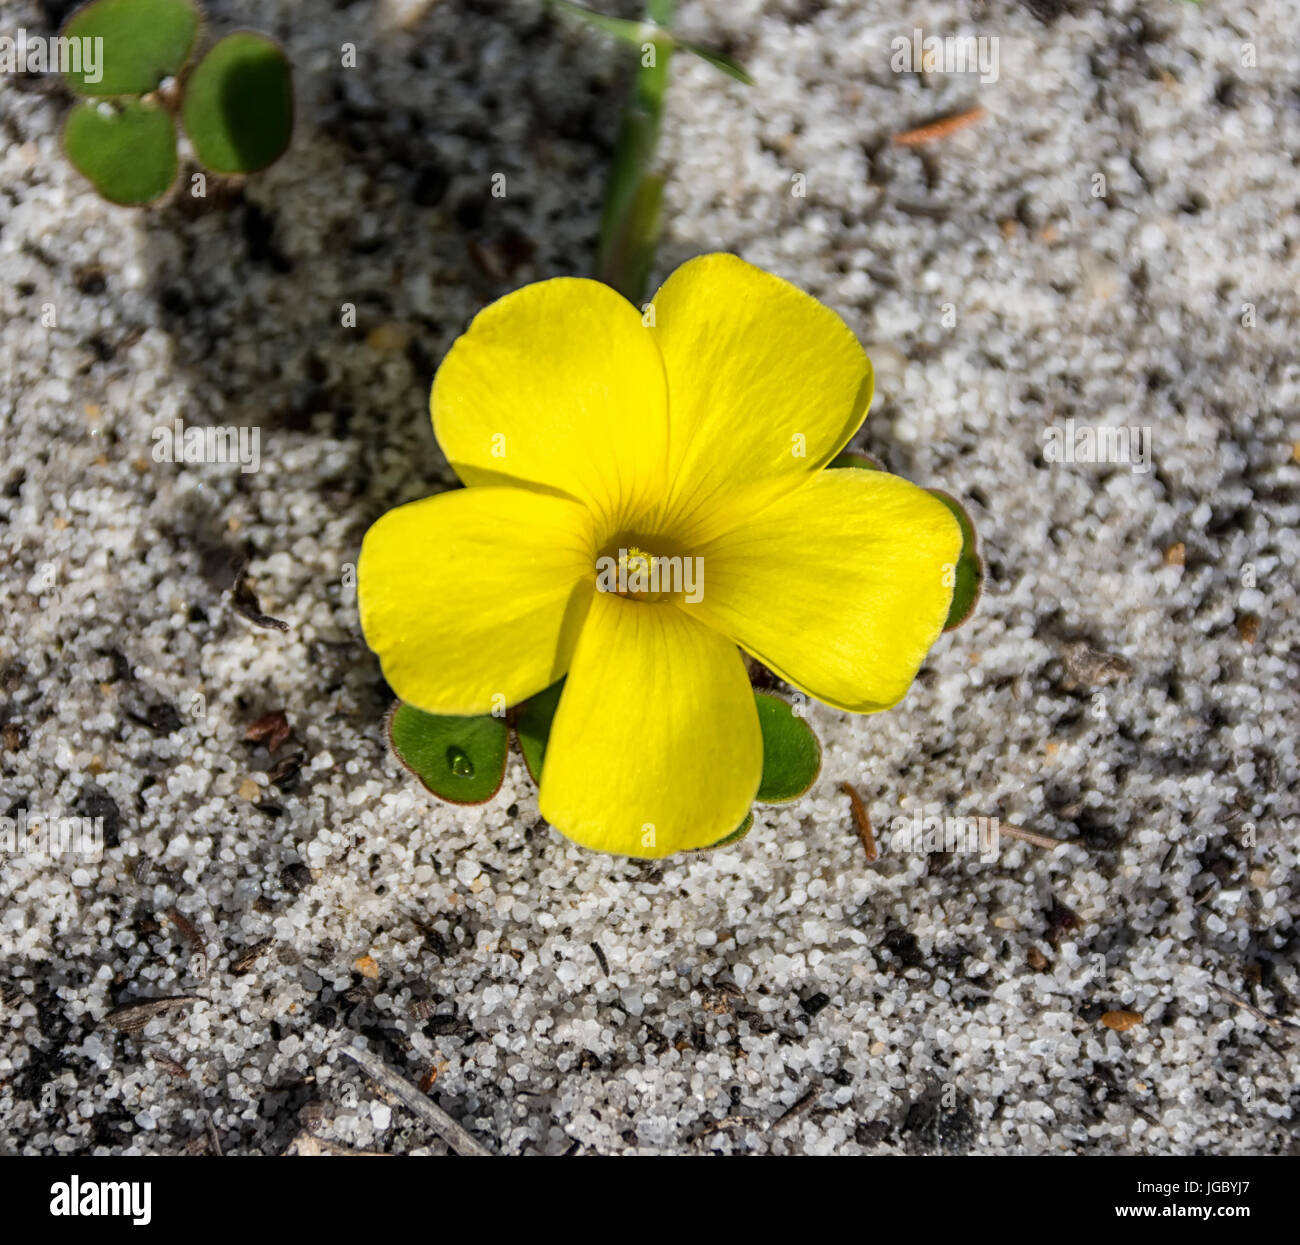 Oxalis luteola flower in the Southern Cape, South Africa Stock Photo